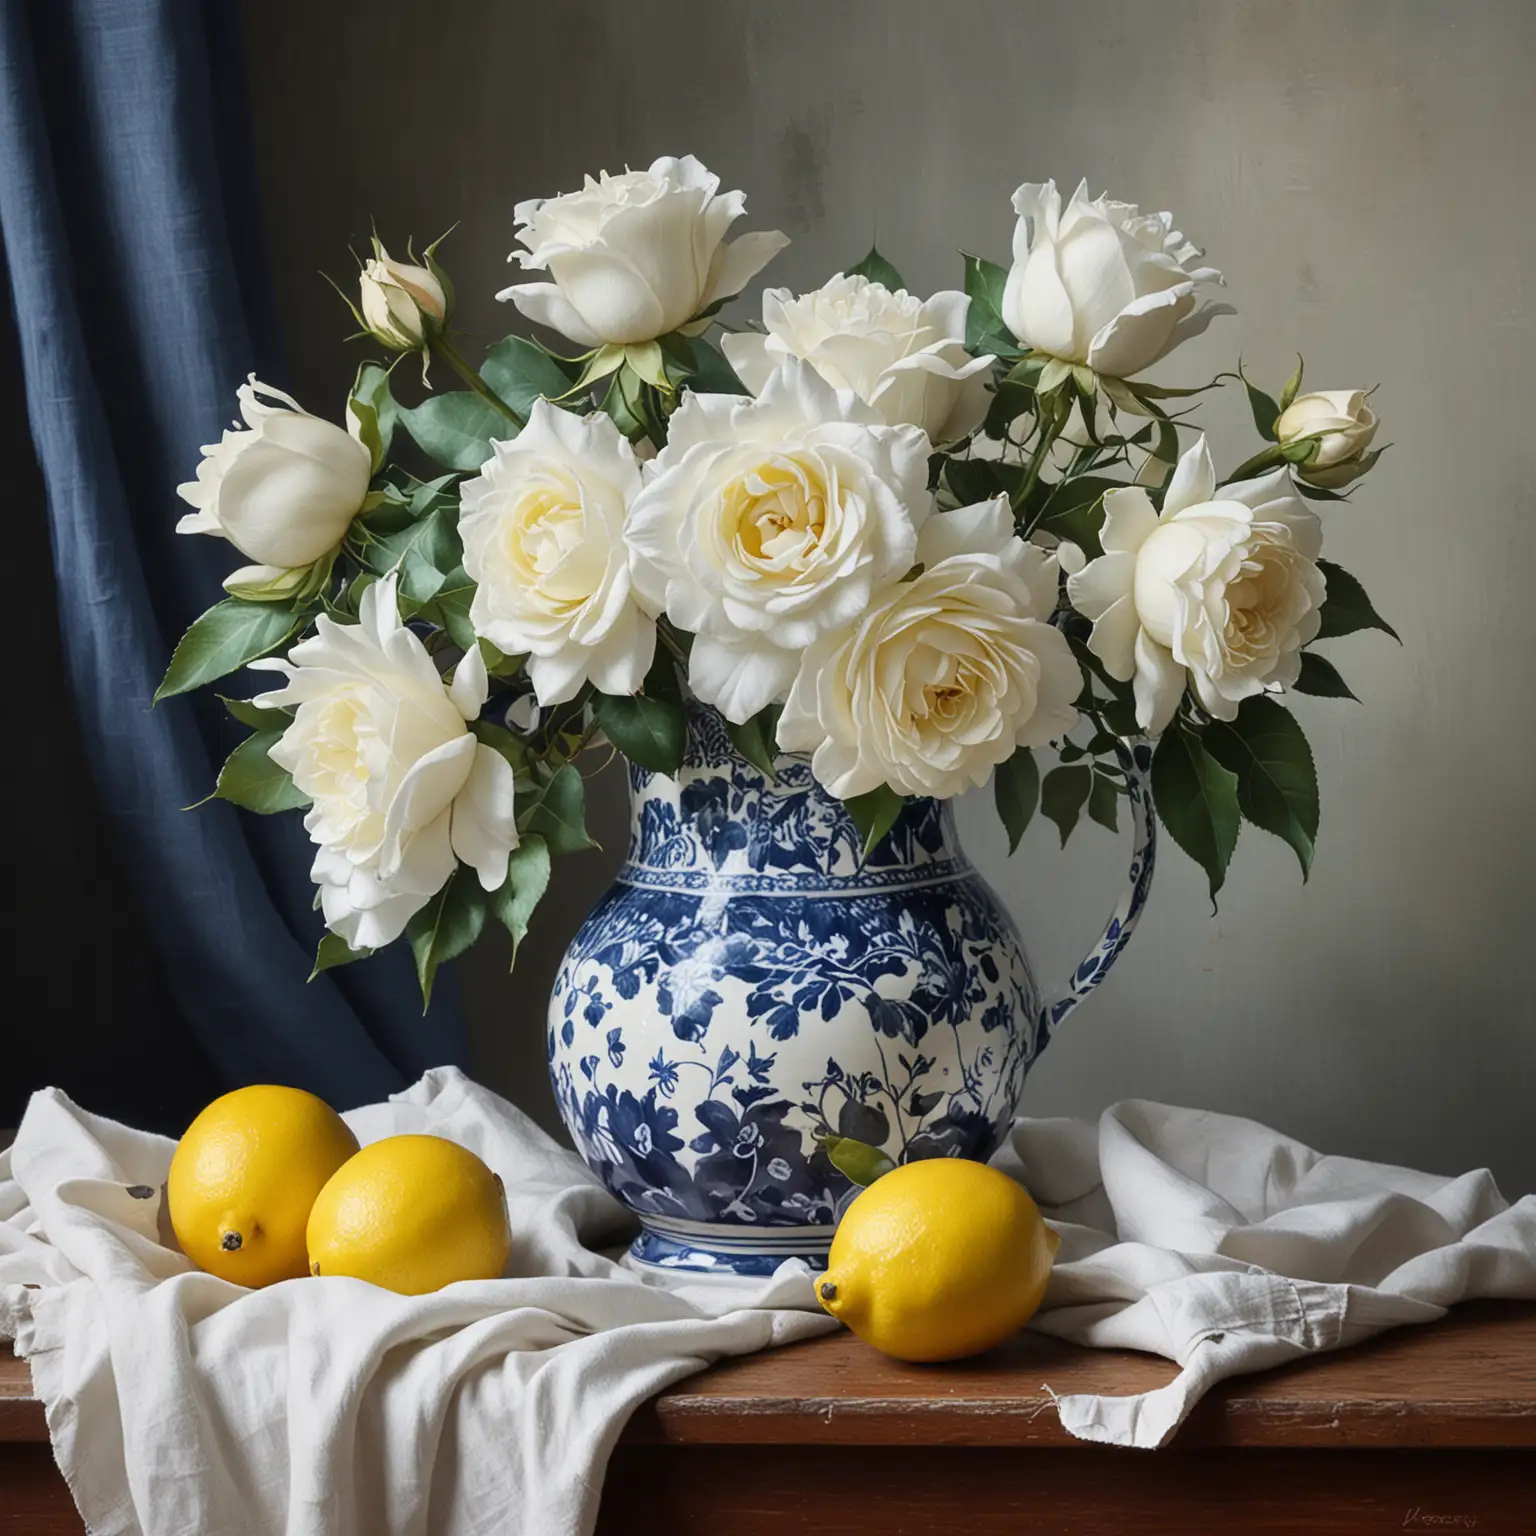 A STILL LIFE PAINTING OF A BLUE AND WHITE PITCHER WITH WHITE ROSES A CLOTH AND LEMONS